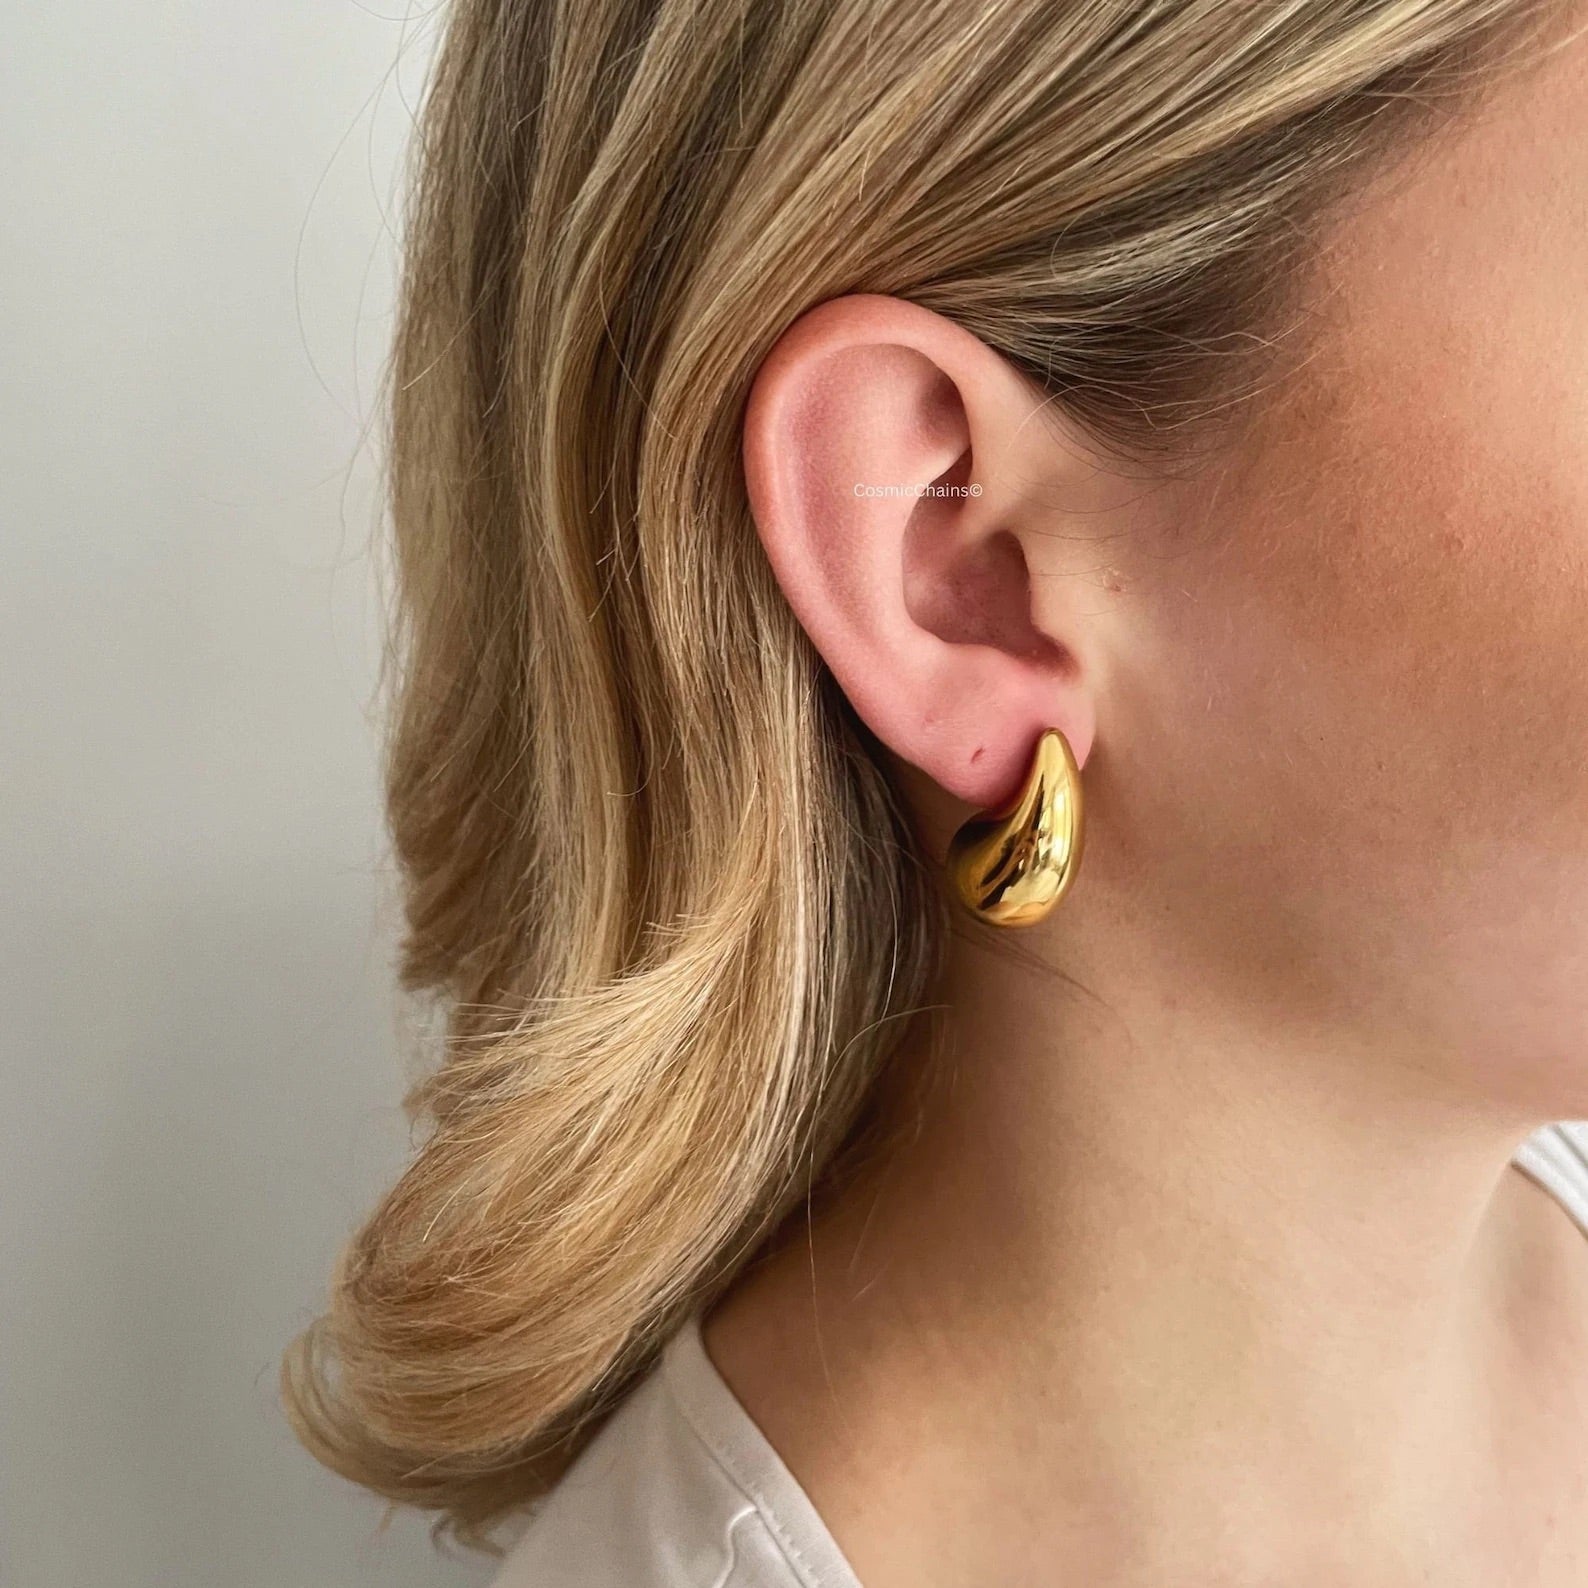 Stylish gold cluster earrings for a trendy look